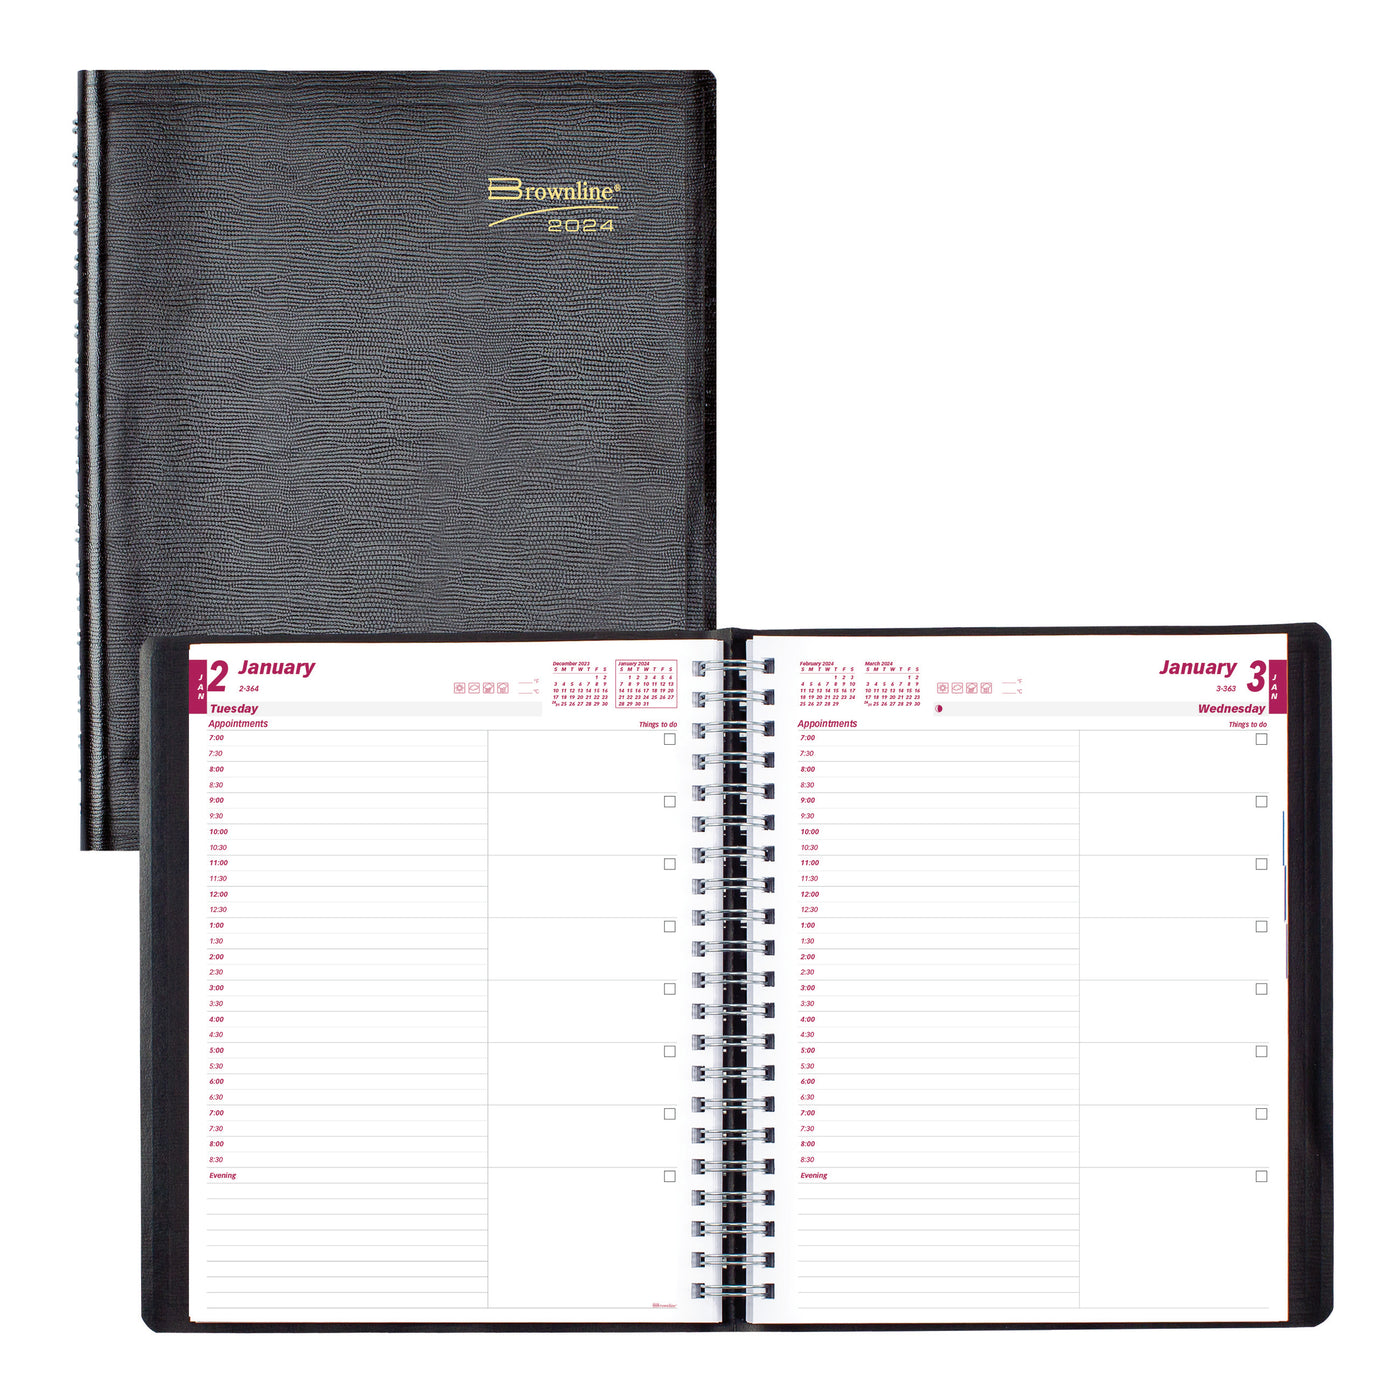 Brownline Daily Appoinment Book - 8 1/2" x 11" - Black Cover